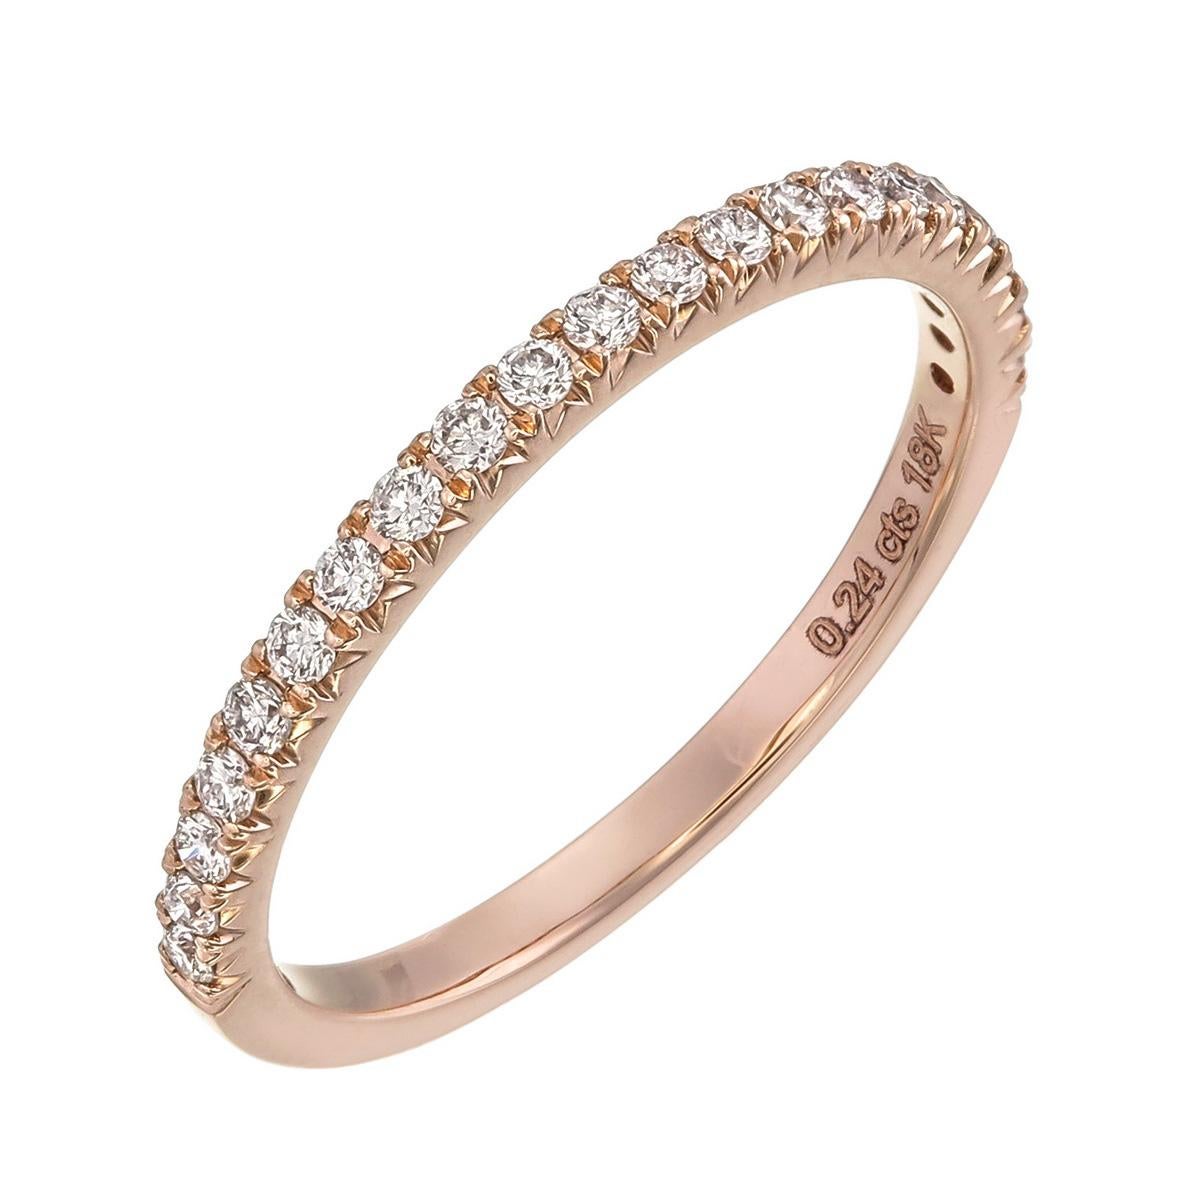 Orloff of Denmark;
This slender band of 18 Karat rose gold is the quintessence of understated elegance. Encrusted with 21 SI2, F color diamonds, it radiates a soft, rosy hue that complements the fire of the stones. Ideal for stacking or as a